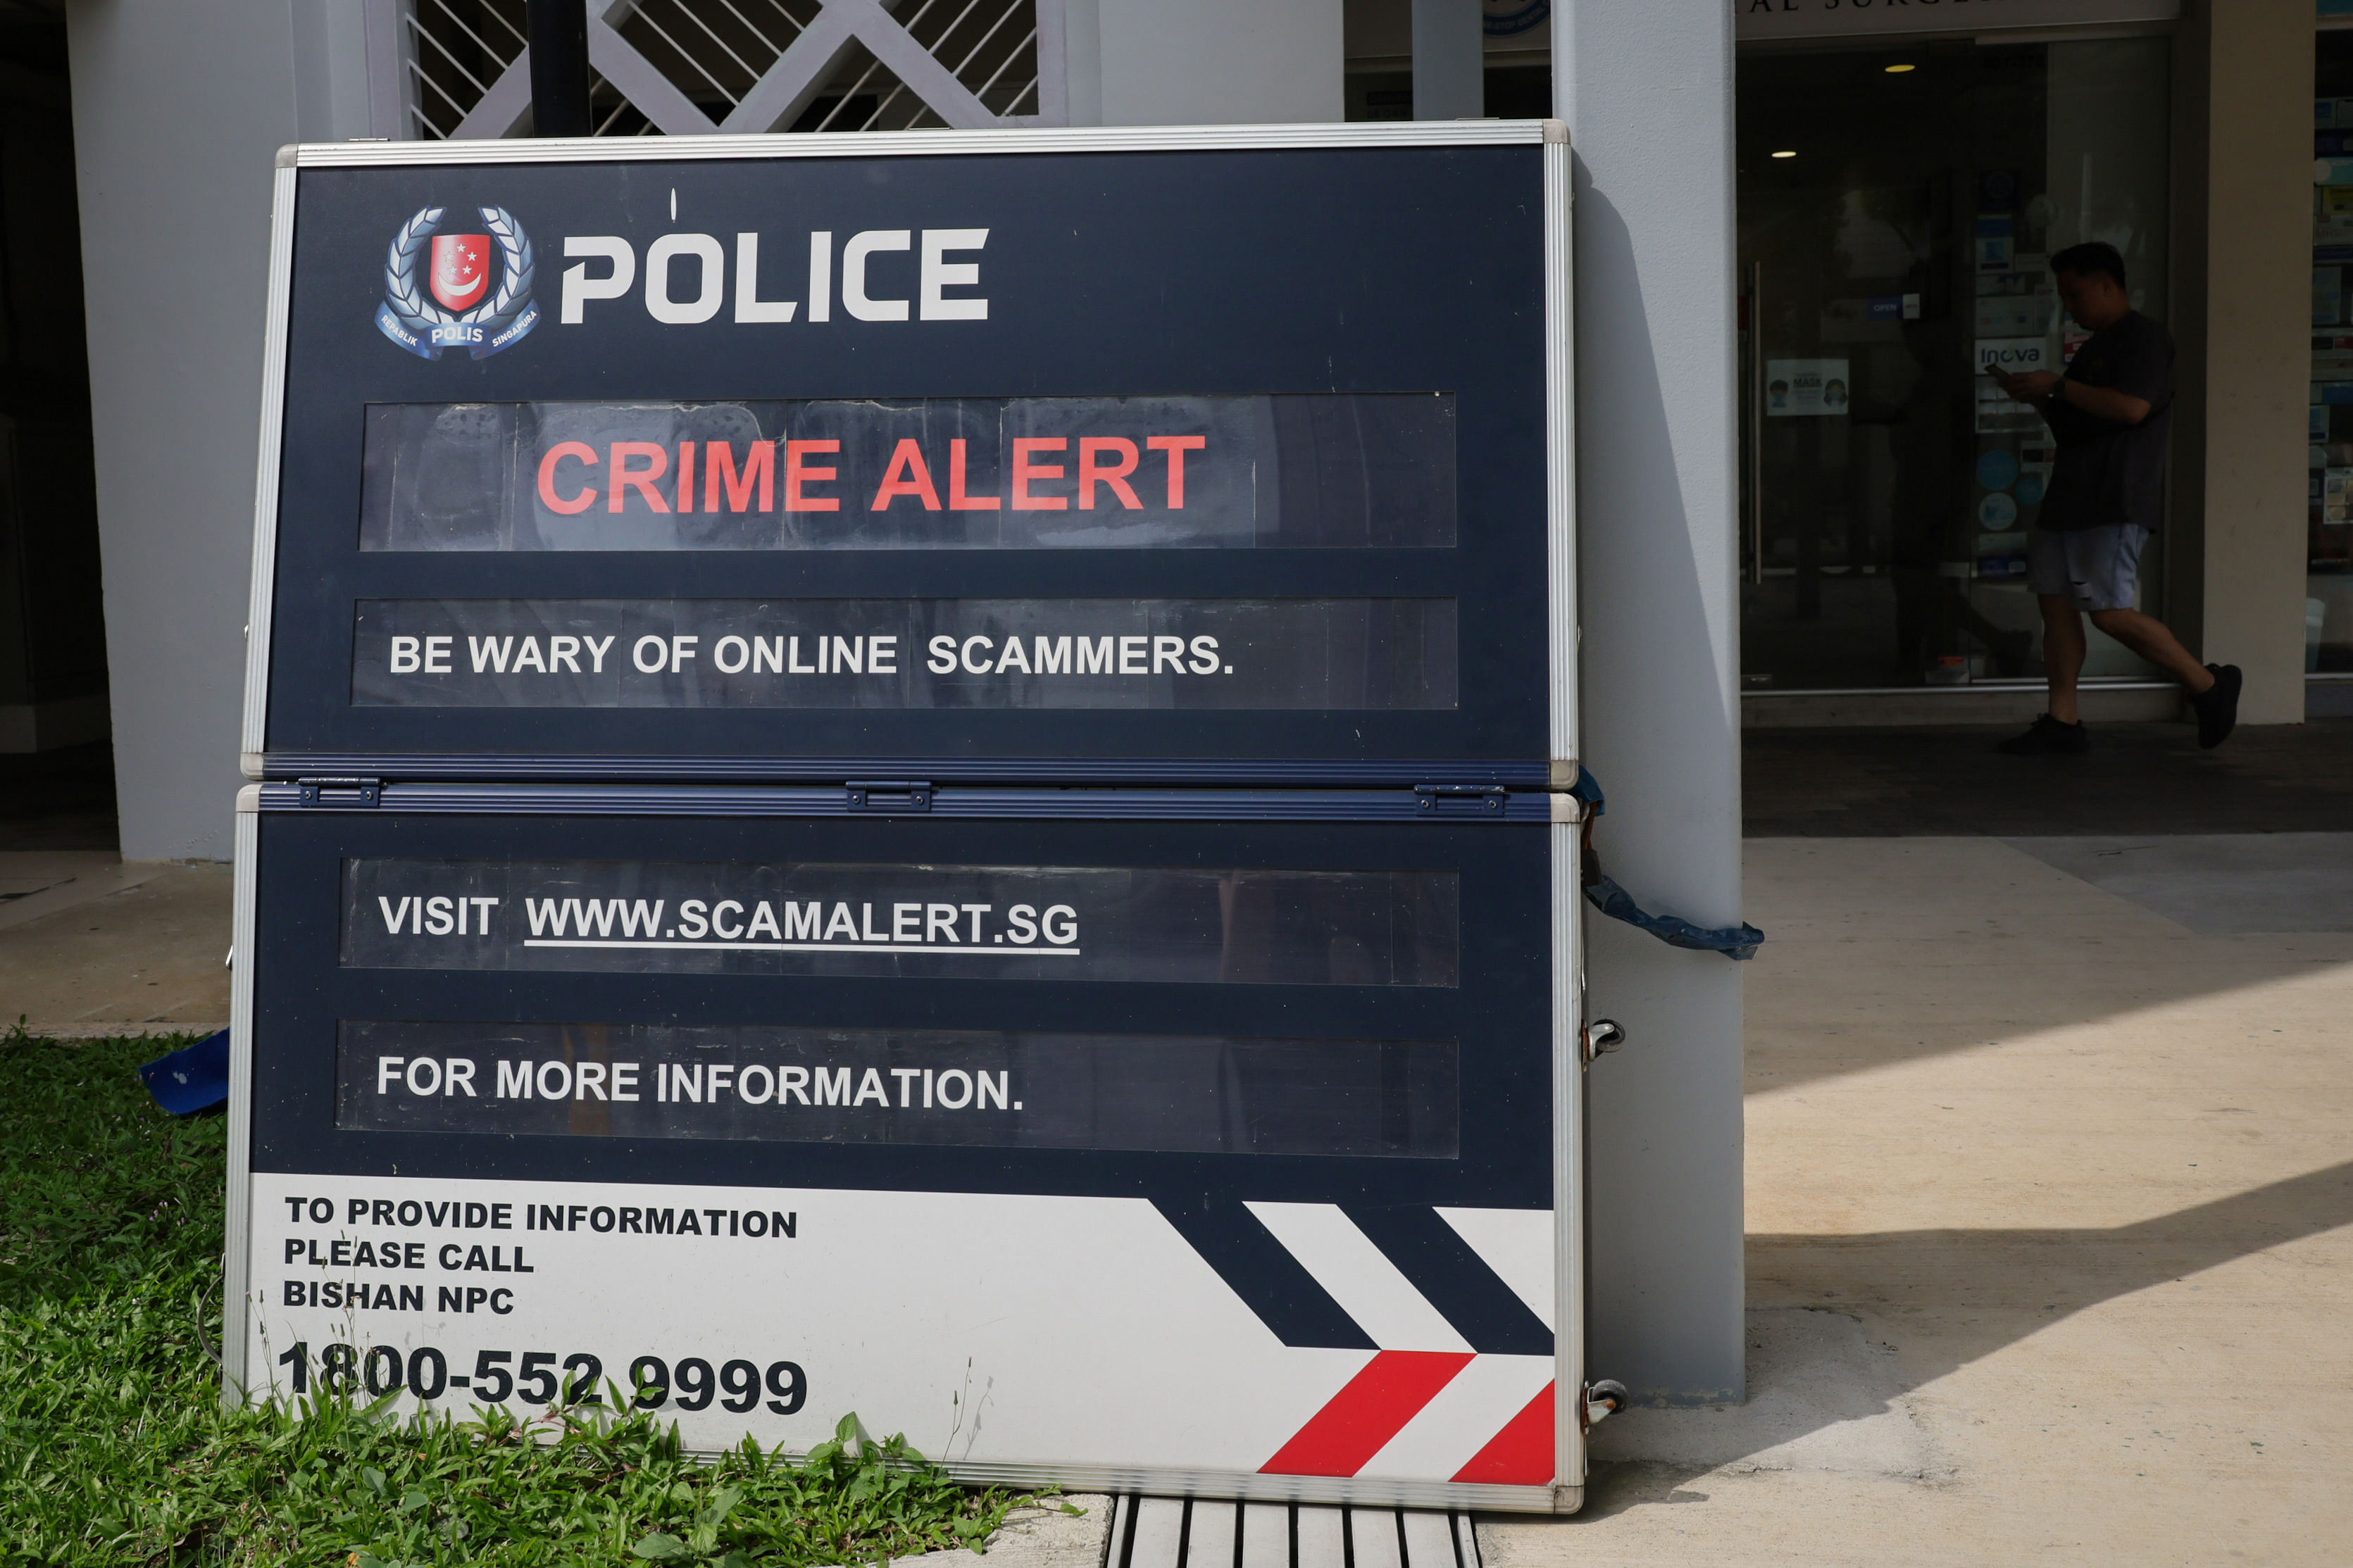 9 suspects investigated for technical support scams where victims lost at least $6.7m